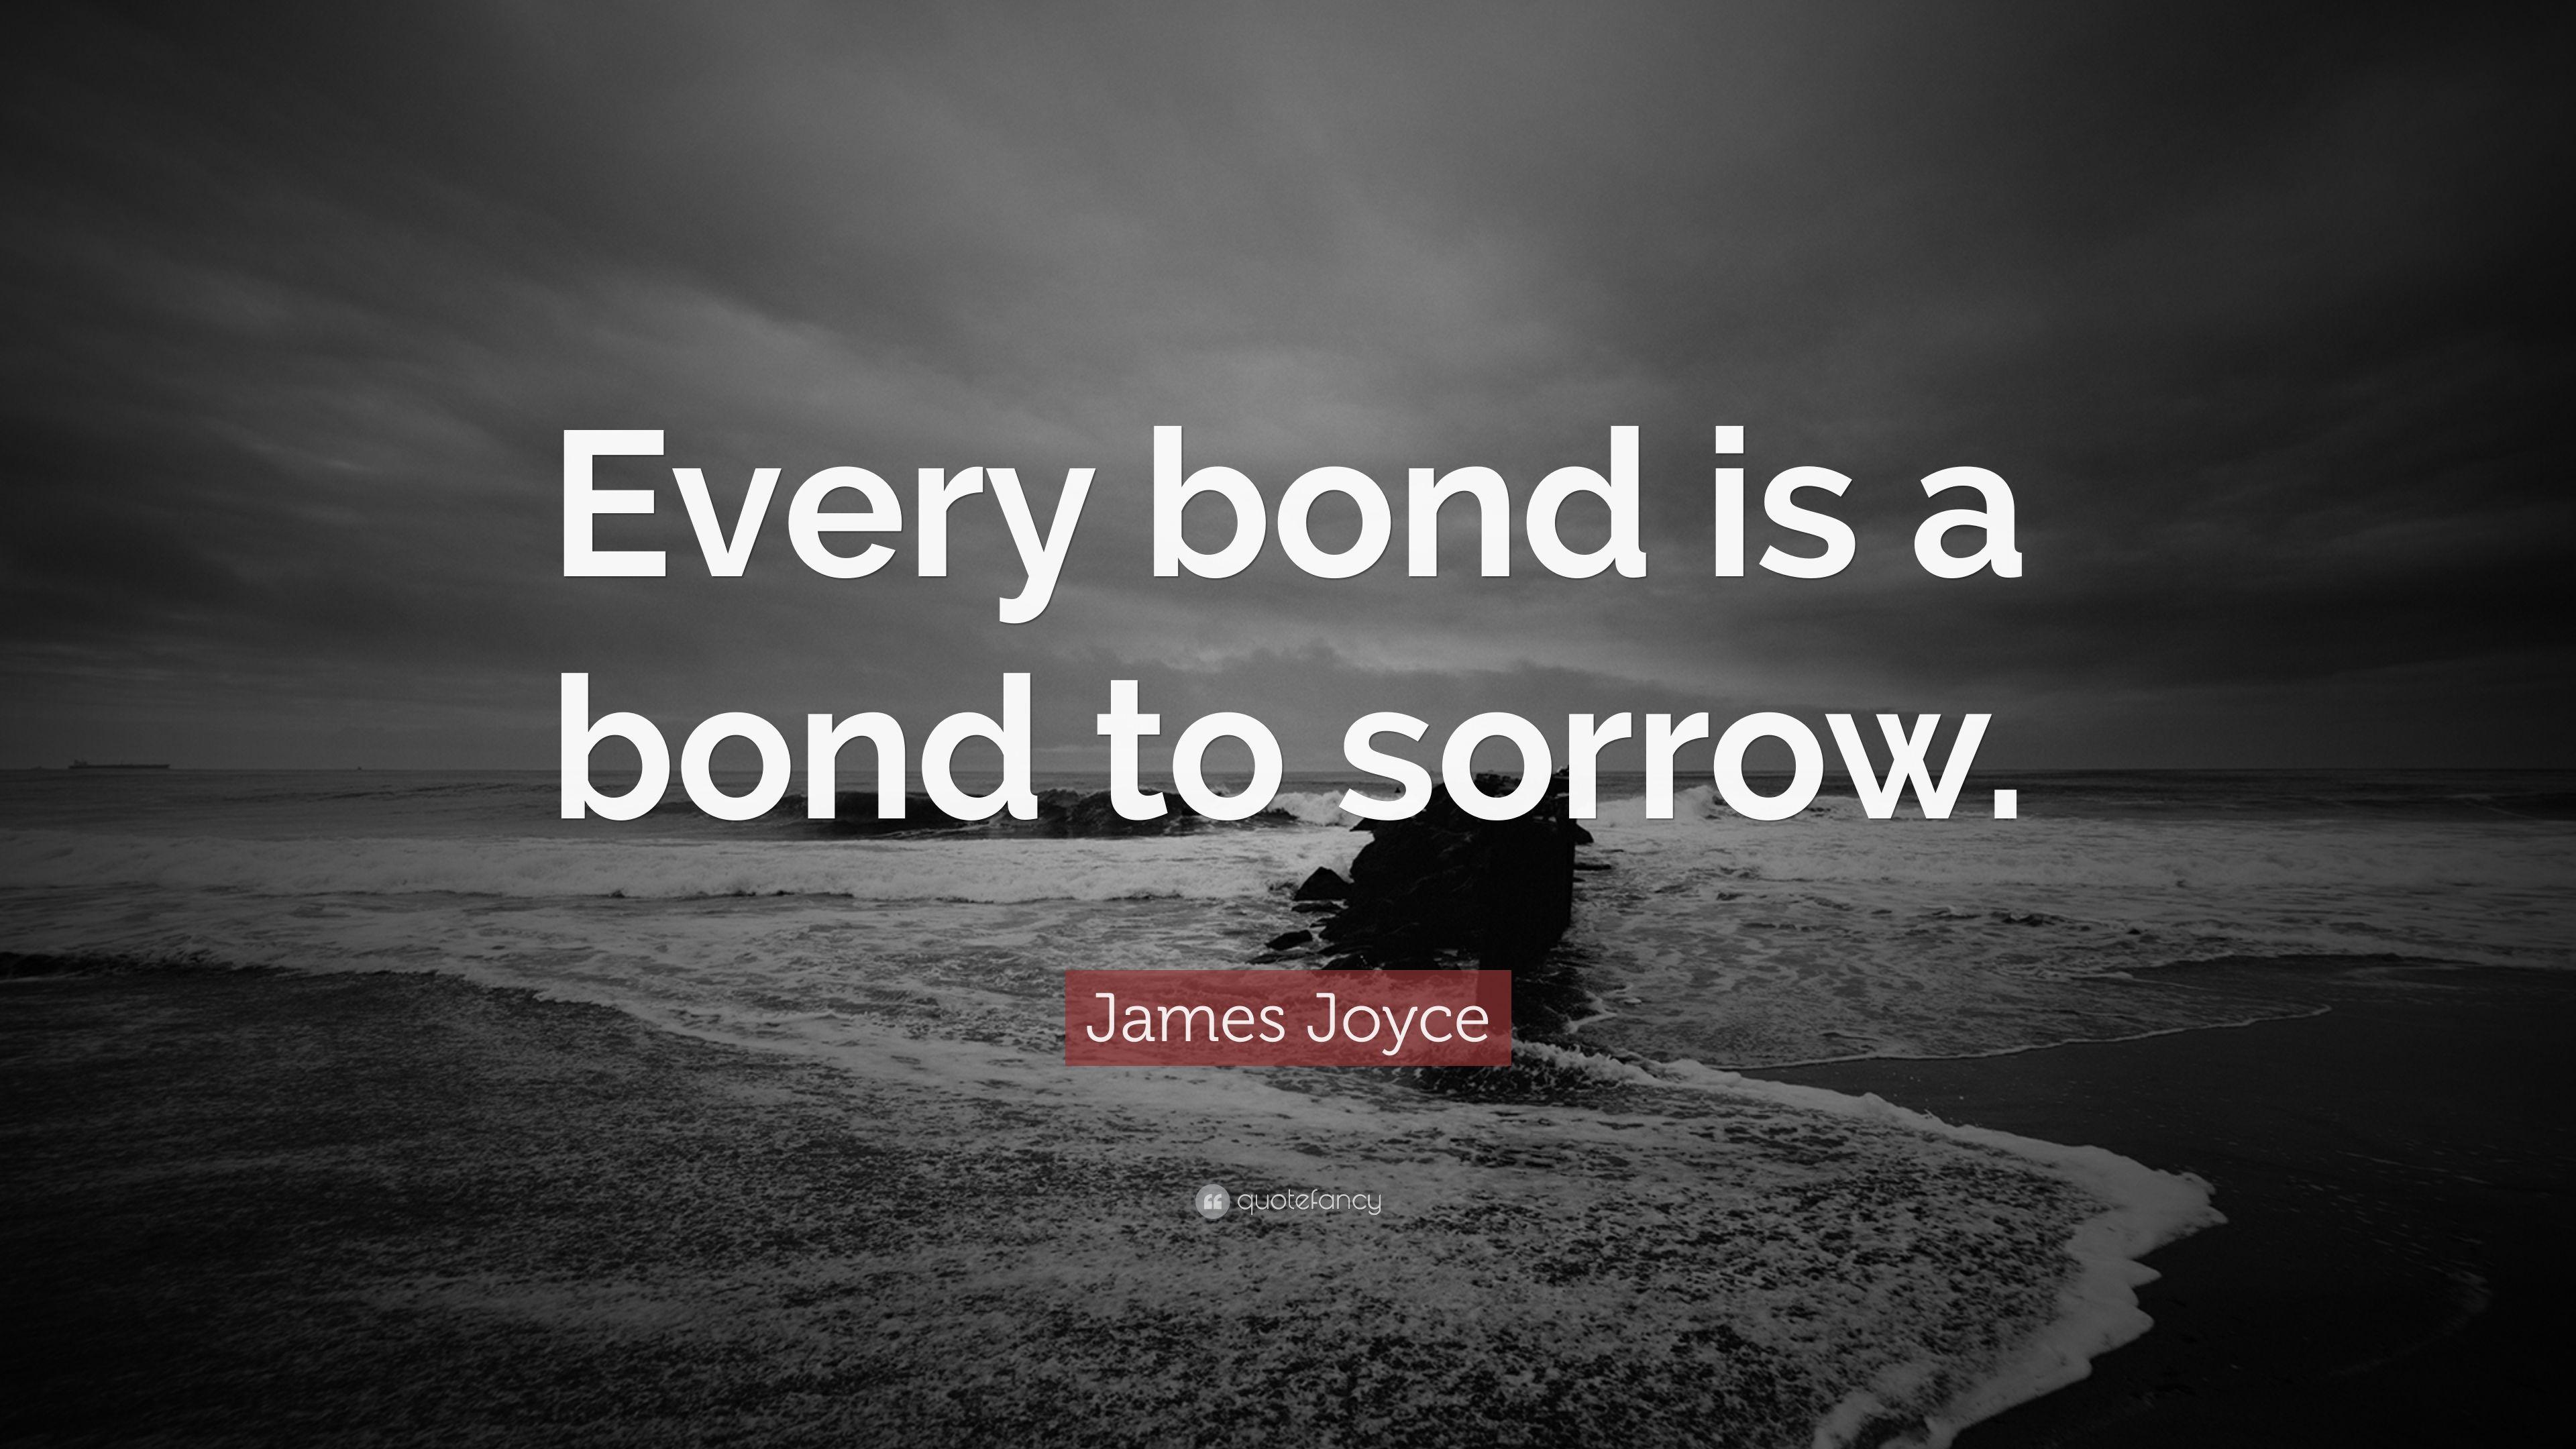 James Joyce Quote: “Every bond is a bond to sorrow.” 8 wallpaper